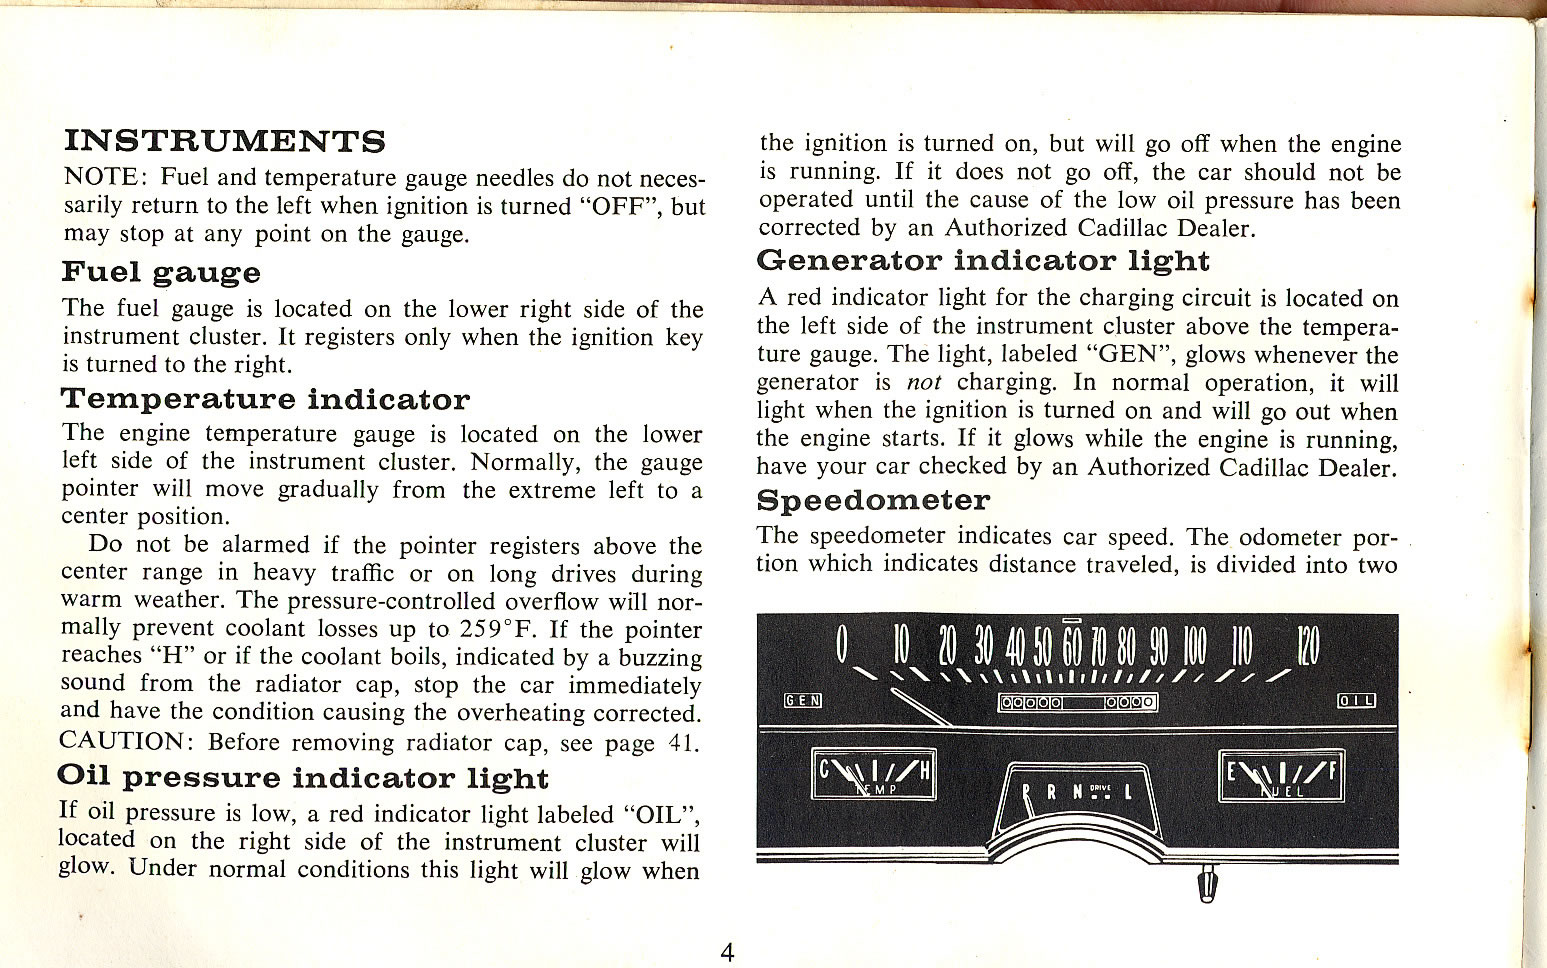 1965 Cadillac Owners Manual Page 43